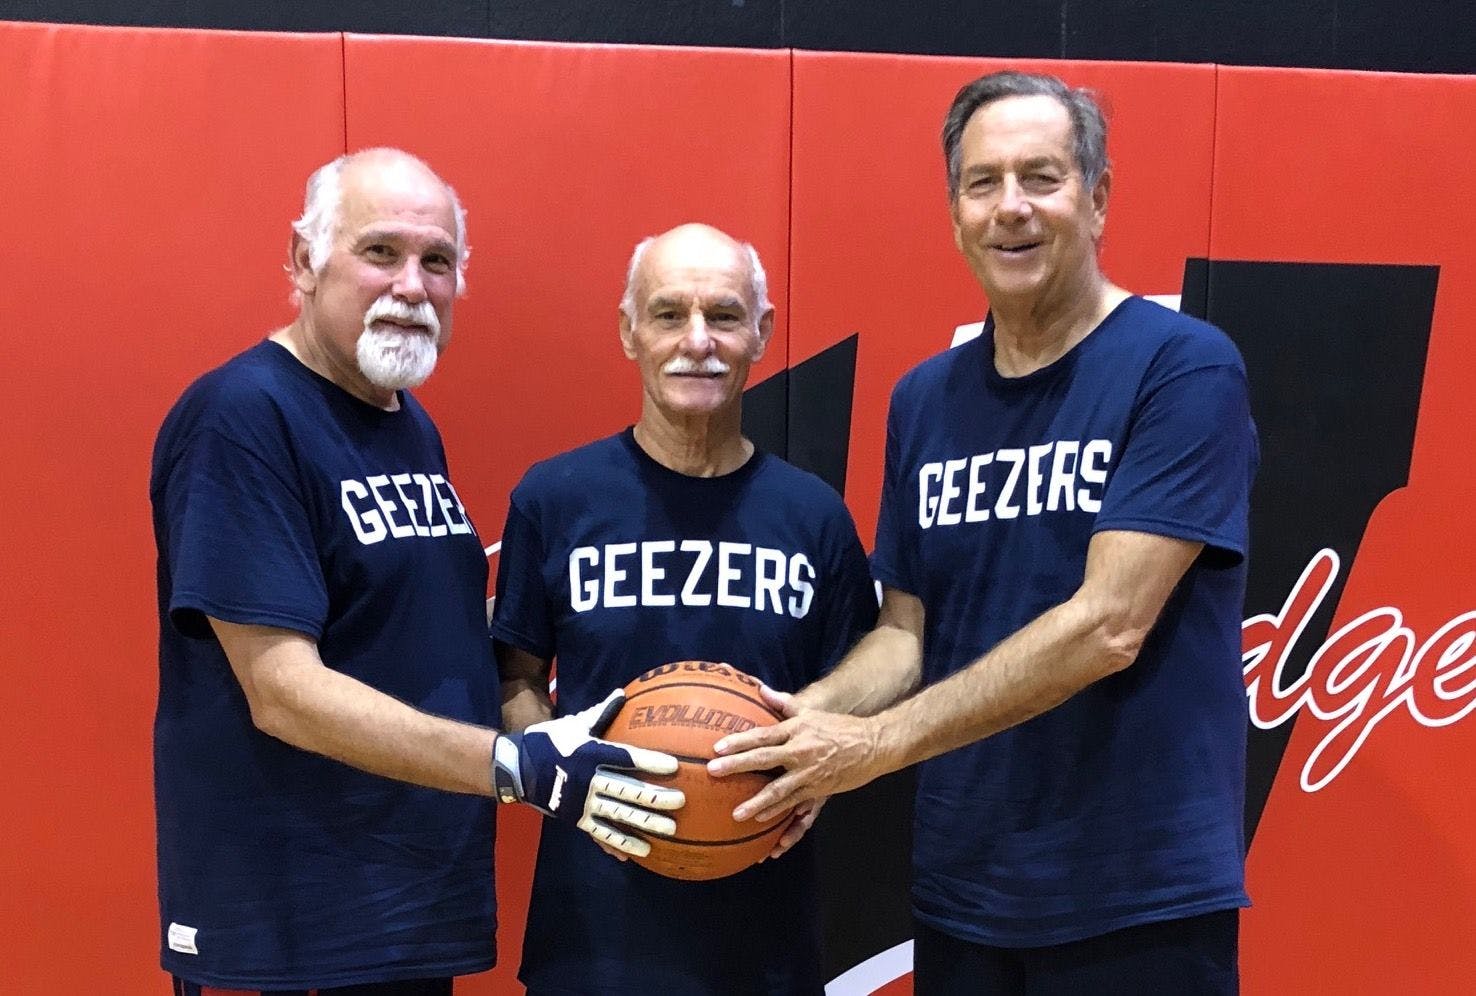 77-year-old veterinarian and basketball star